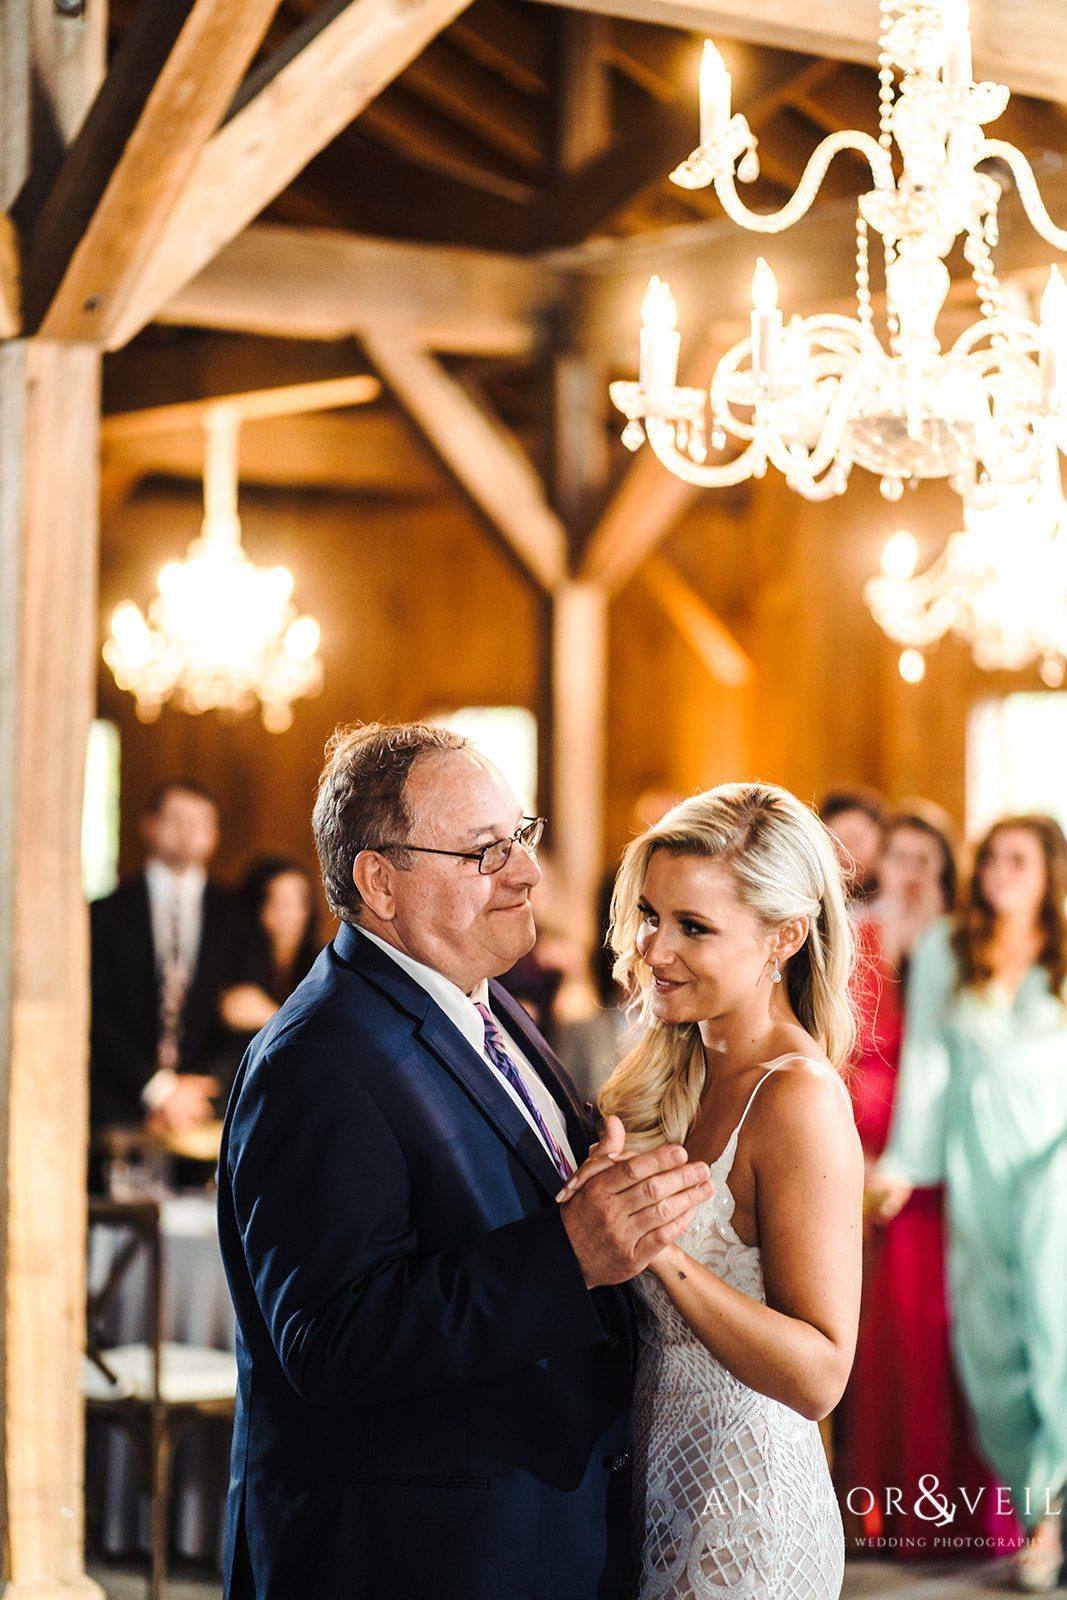 The father-daughter dance at the Boone Hall Plantation Wedding 